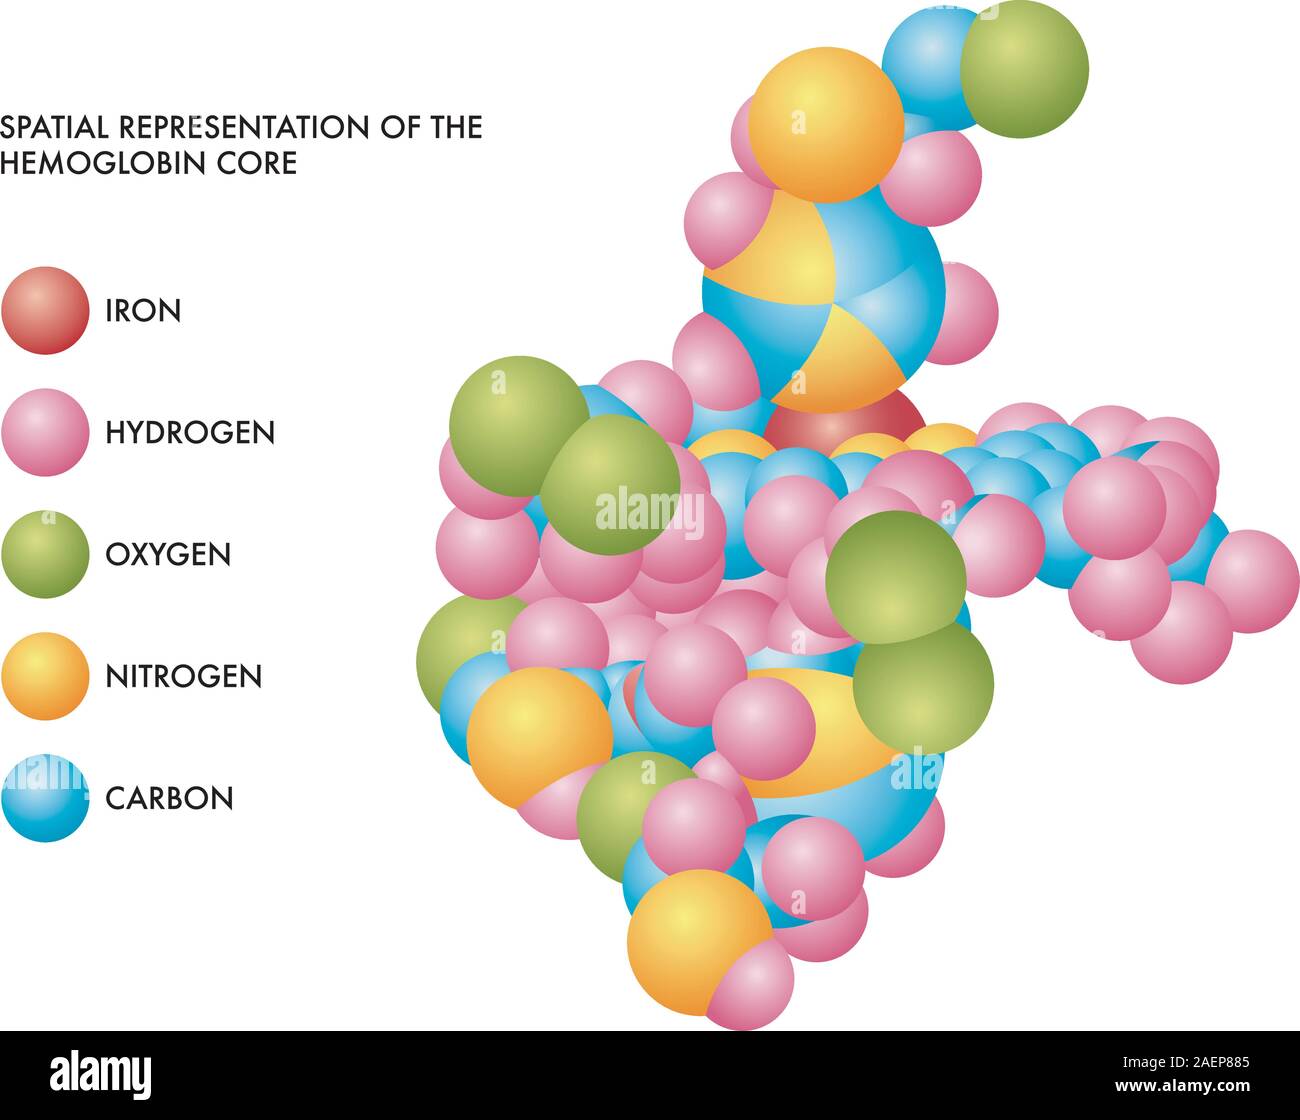 Medical illustration of hemoglobin core spatial representation with molecules of iron, hydrogen, oxygen, nitrogen and carbon in color coded shapes. Stock Vector